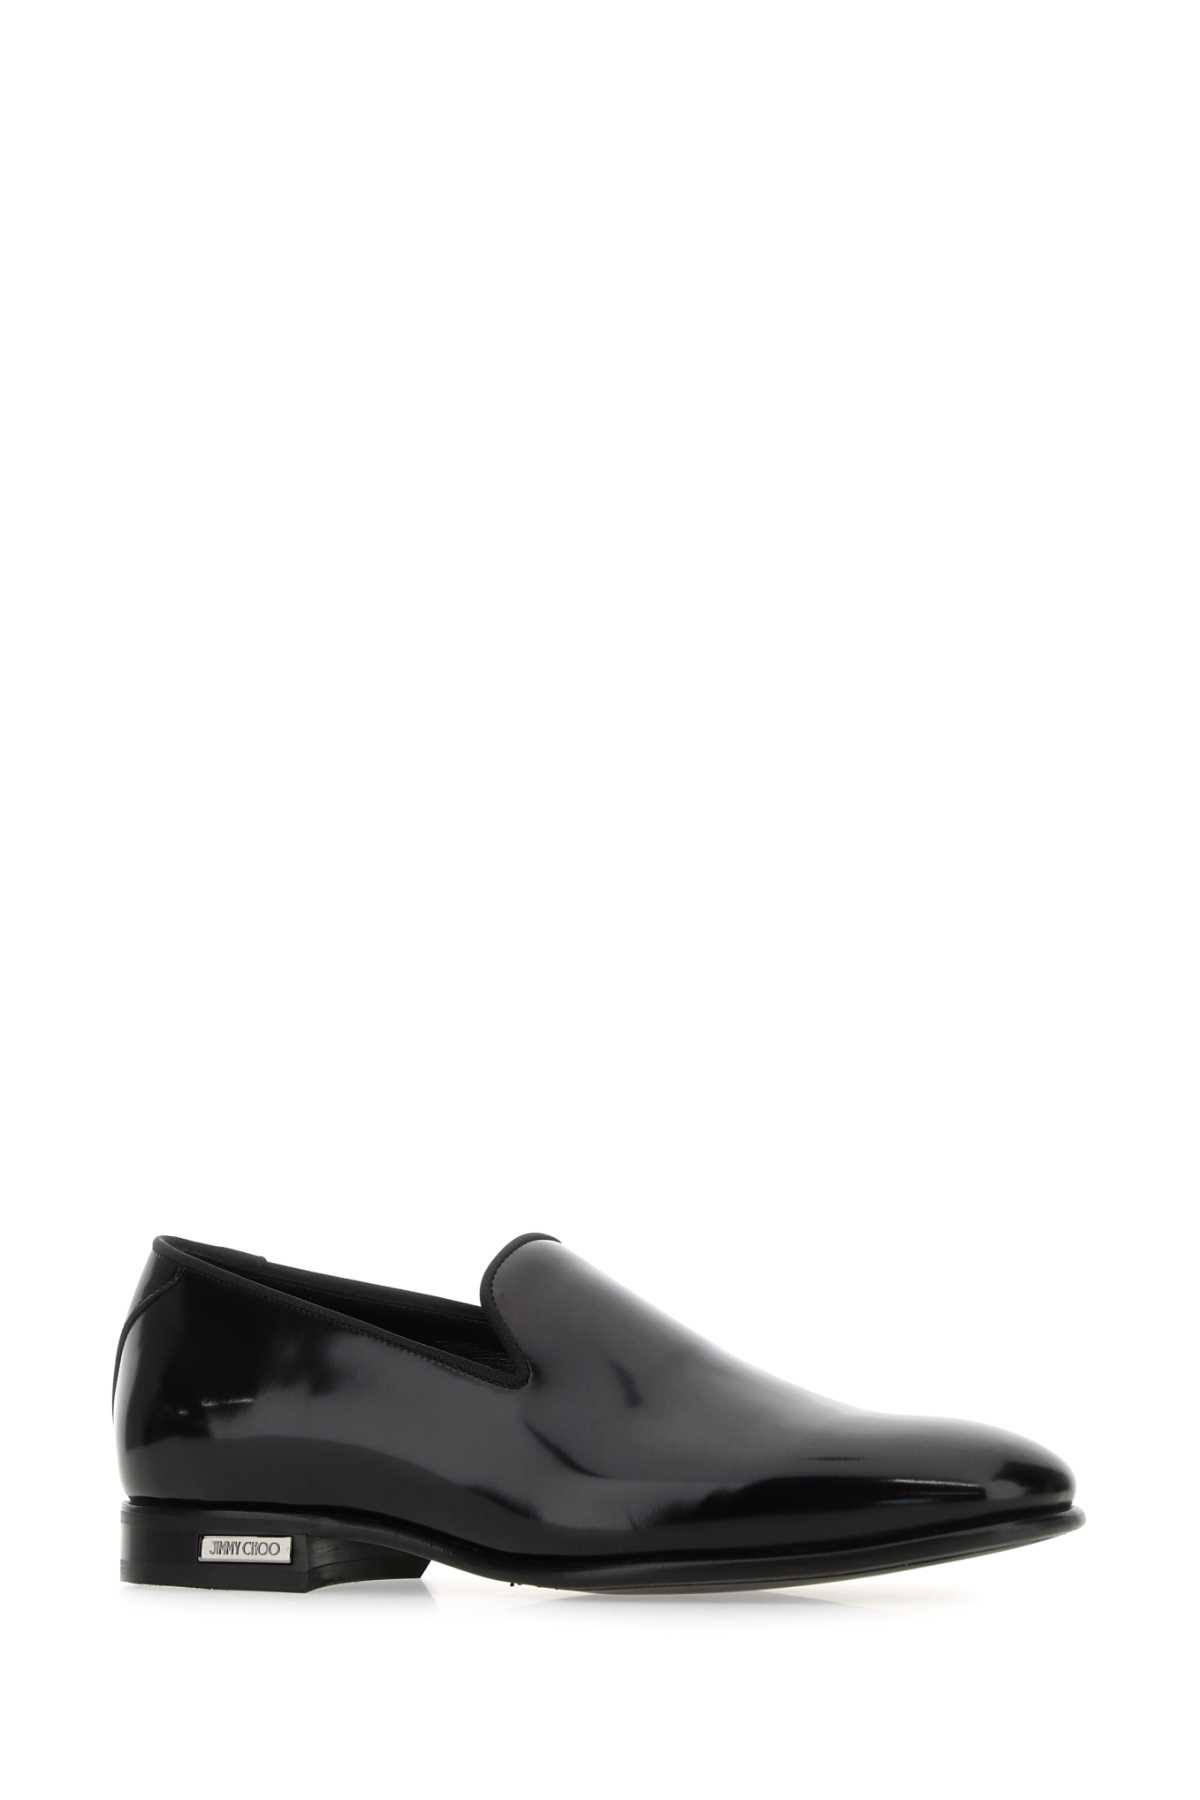 JIMMY CHOO BLACK LEATHER THAME LOAFERS